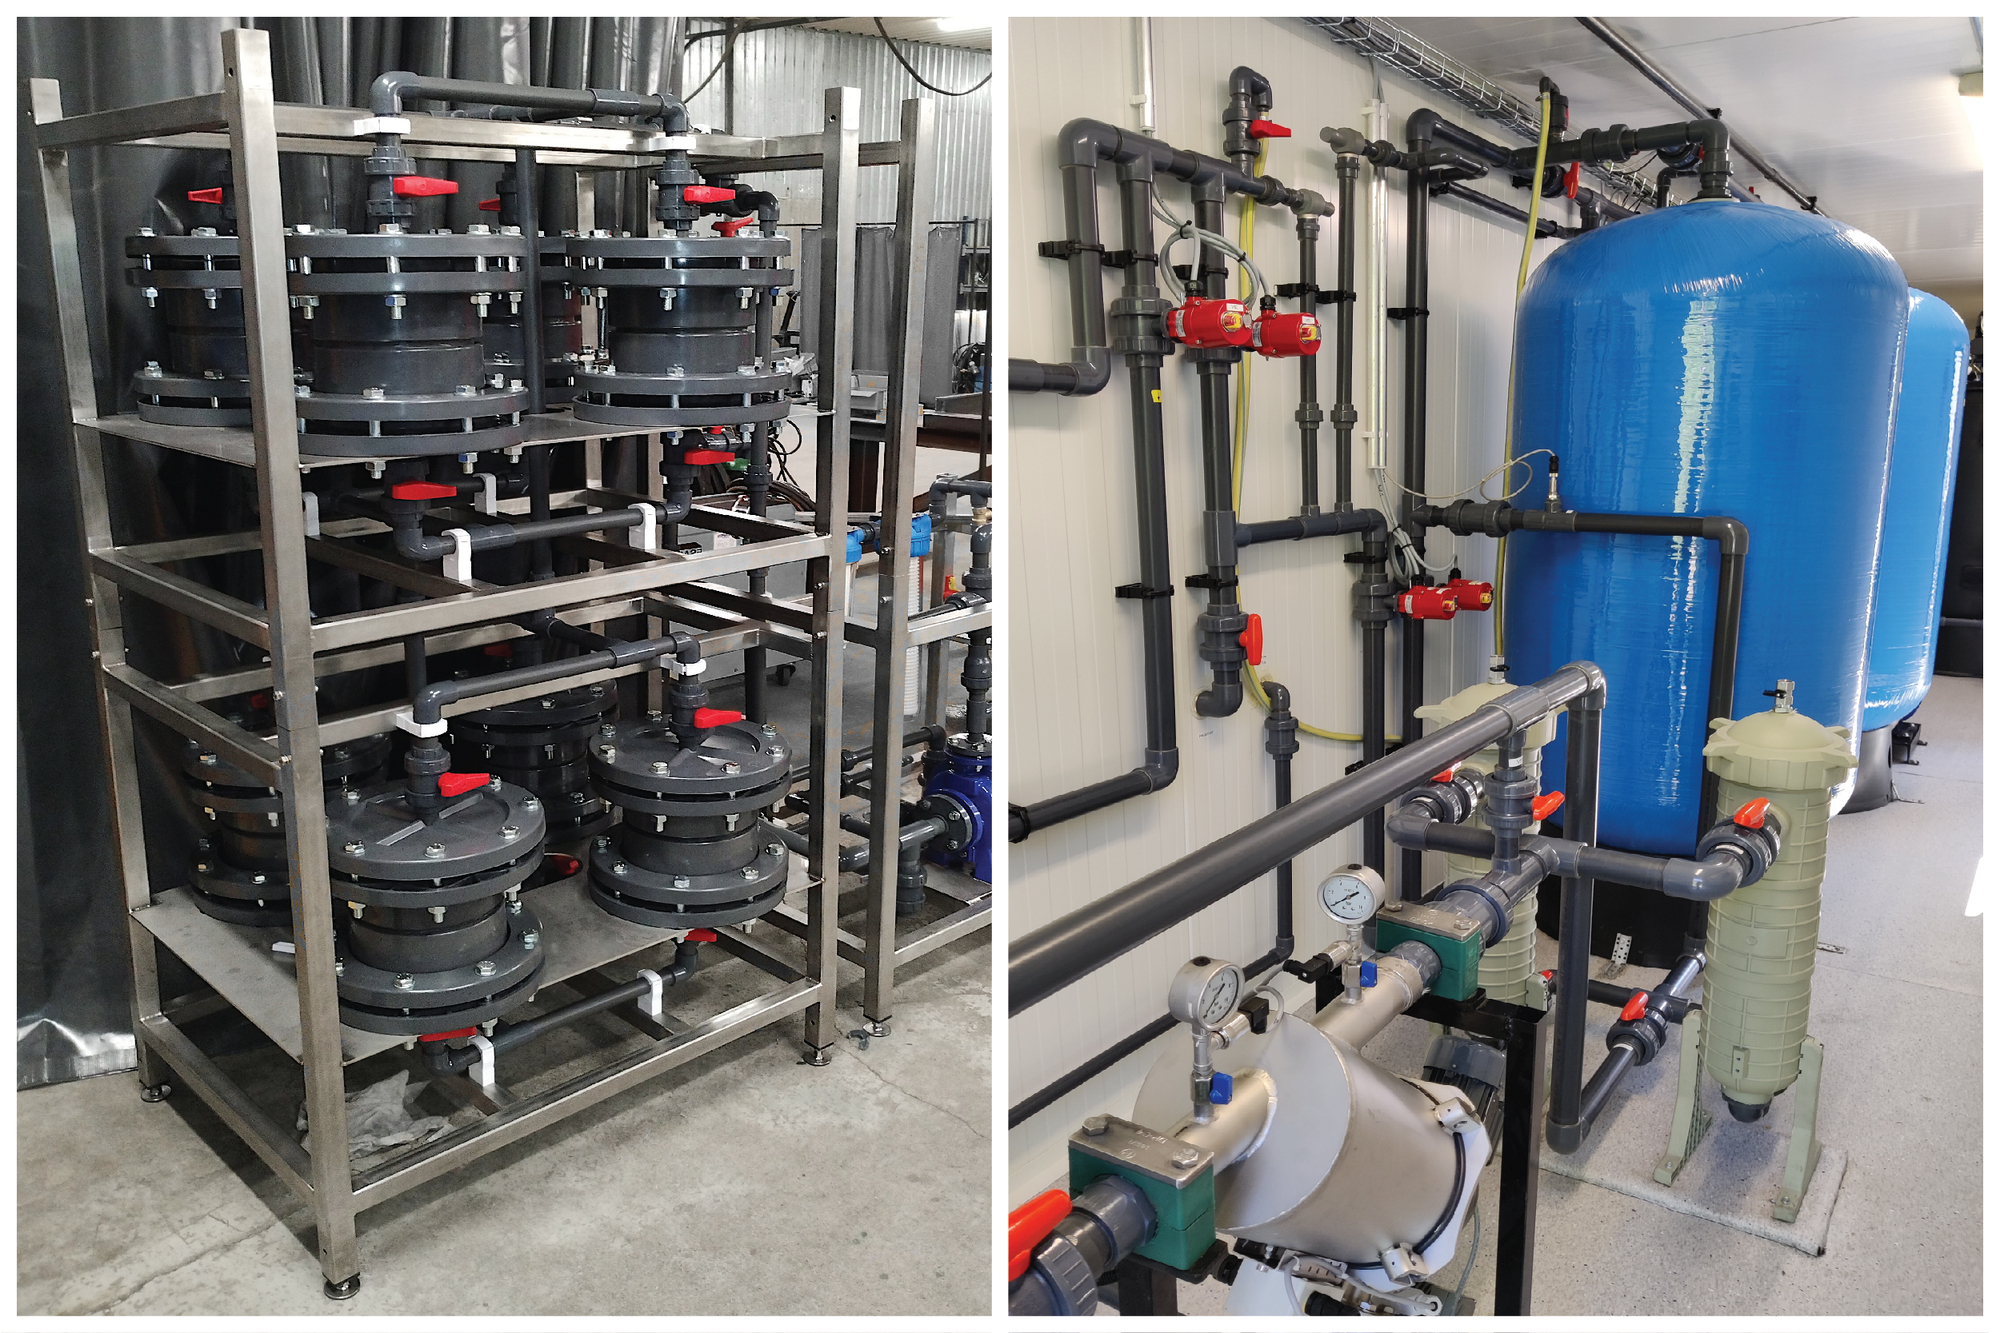 On demand water treatment options